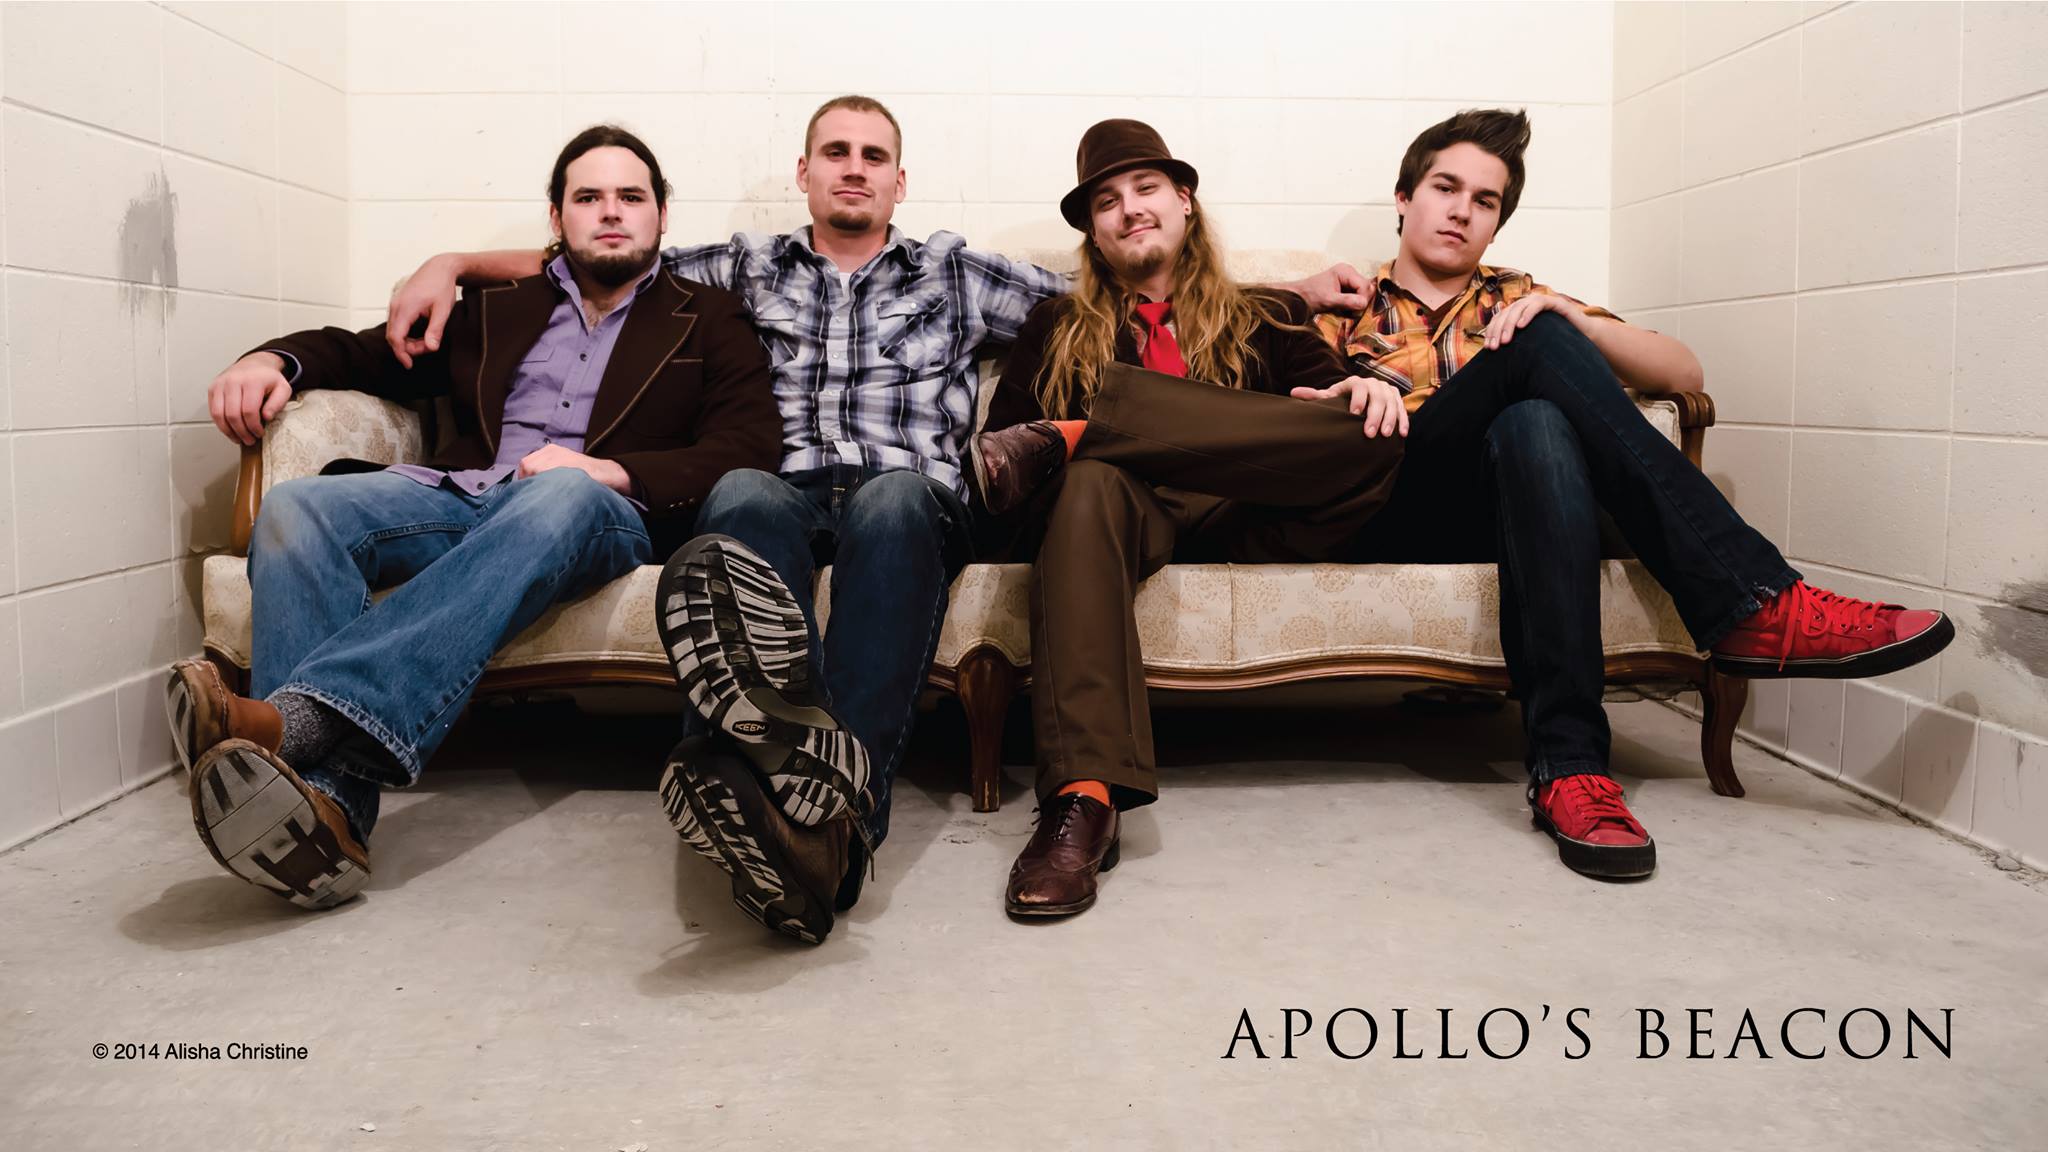 Live Music in O'Neill, Nebraska - 
						Apollo's Beacon performing live at 
						Chesterfield West in O'Neill, NE 
						on Saturday, June 6, 2015